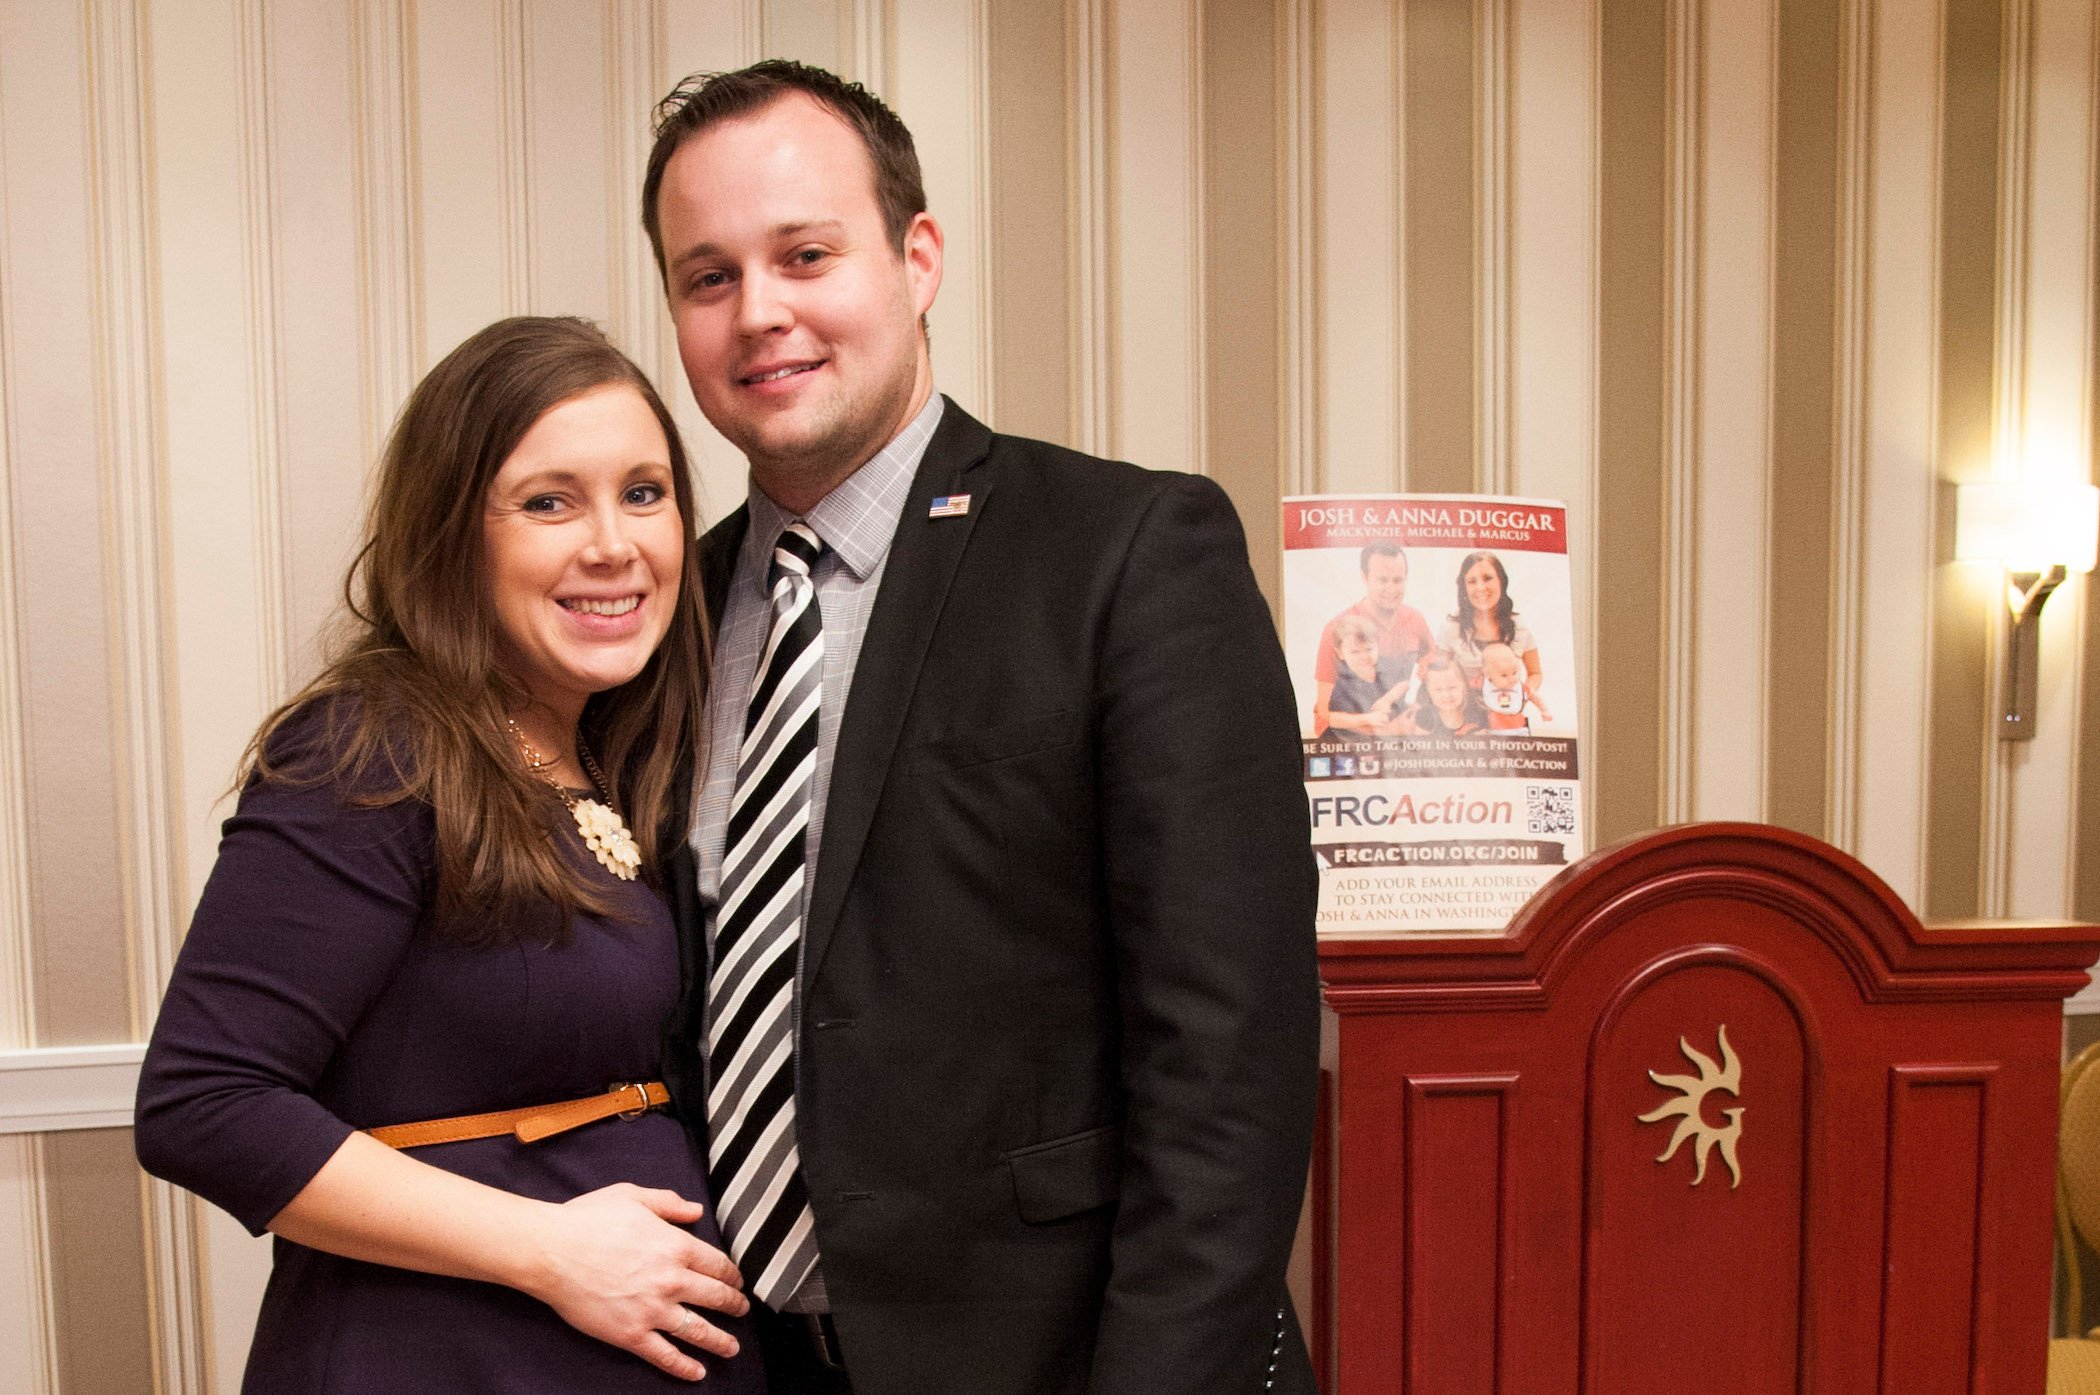 Josh and Anna Duggar Sold Home Ahead of Child Pornography Arrest